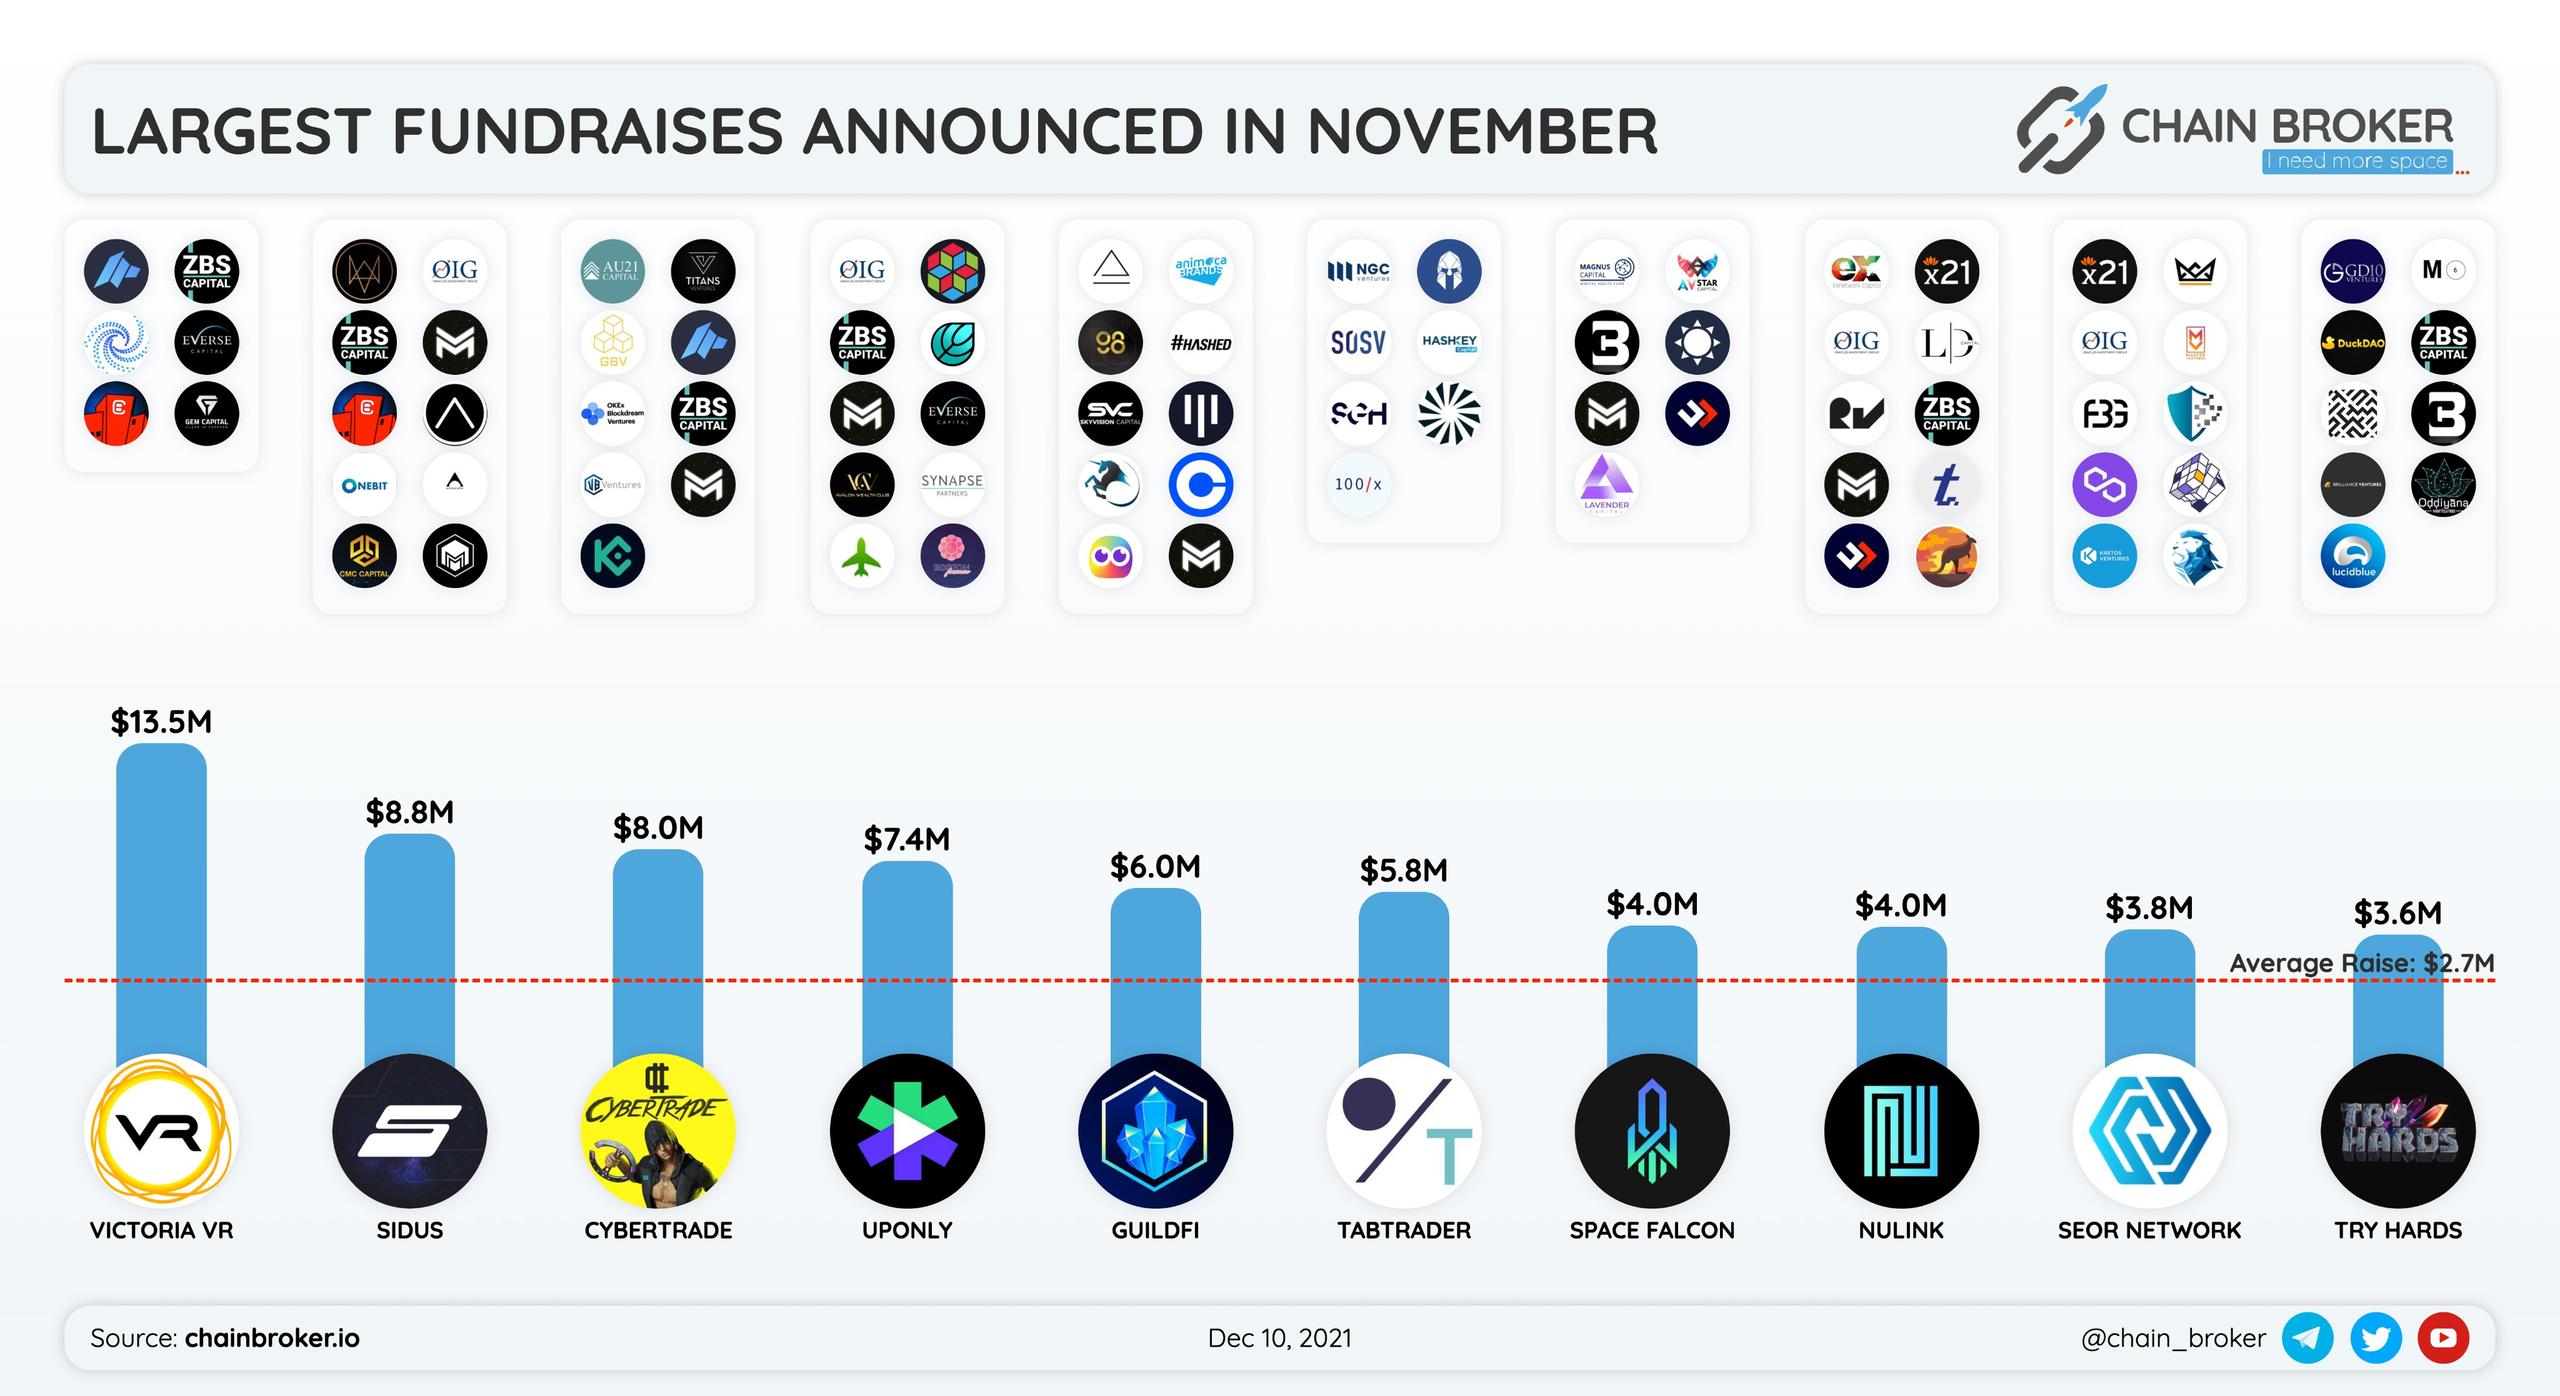 Largest fundraises announced in November